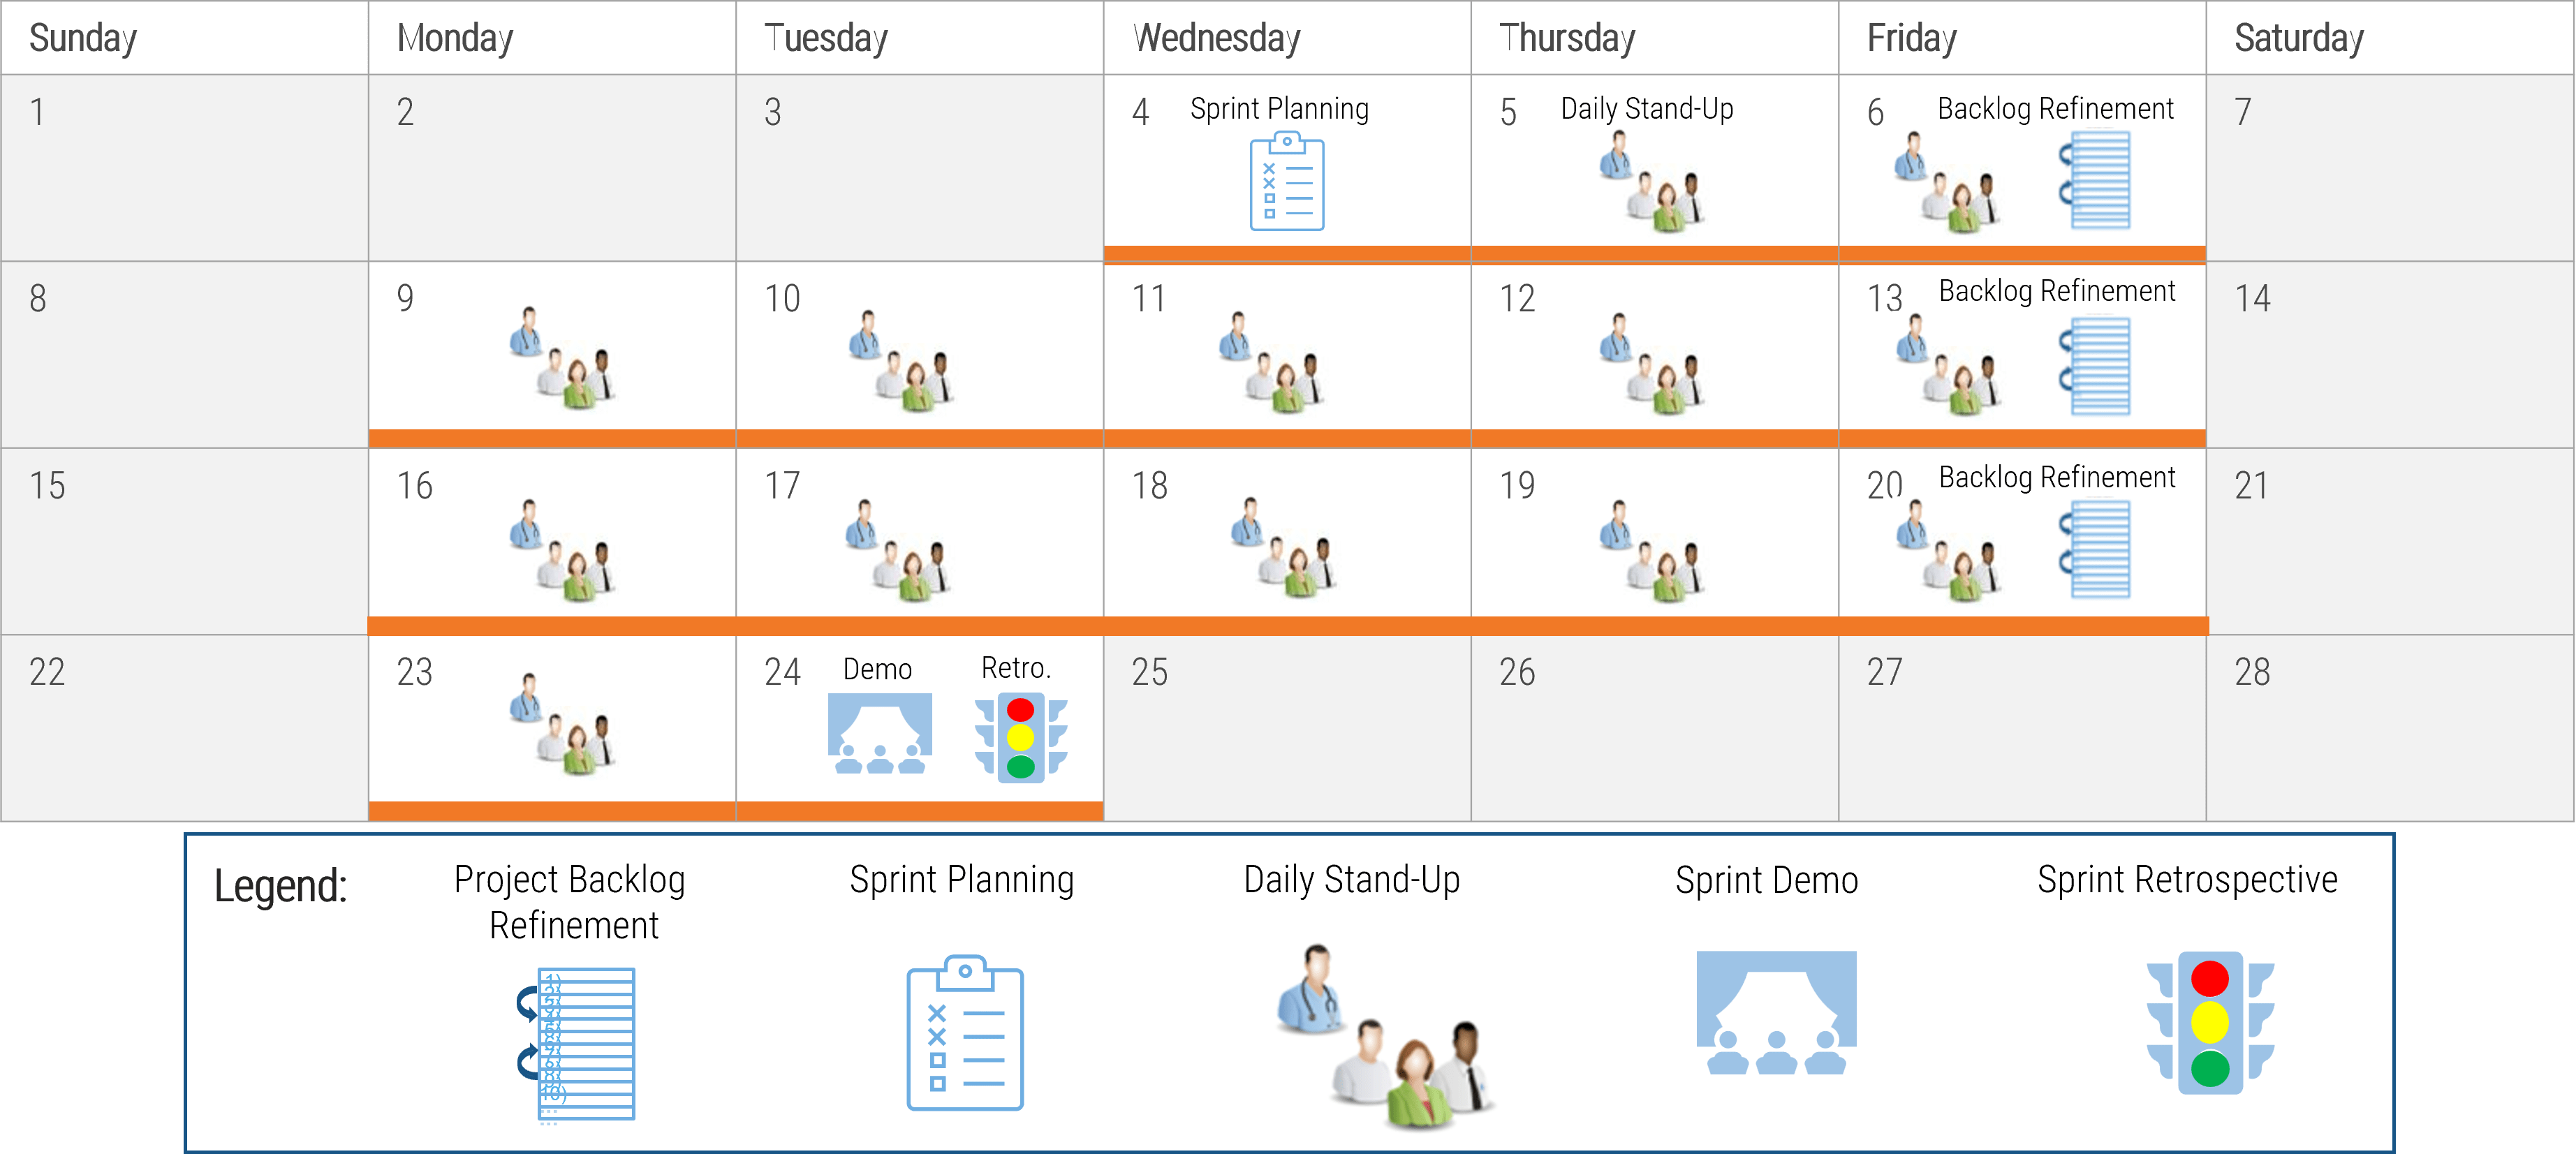 An image of a sample sprint delivery calendar